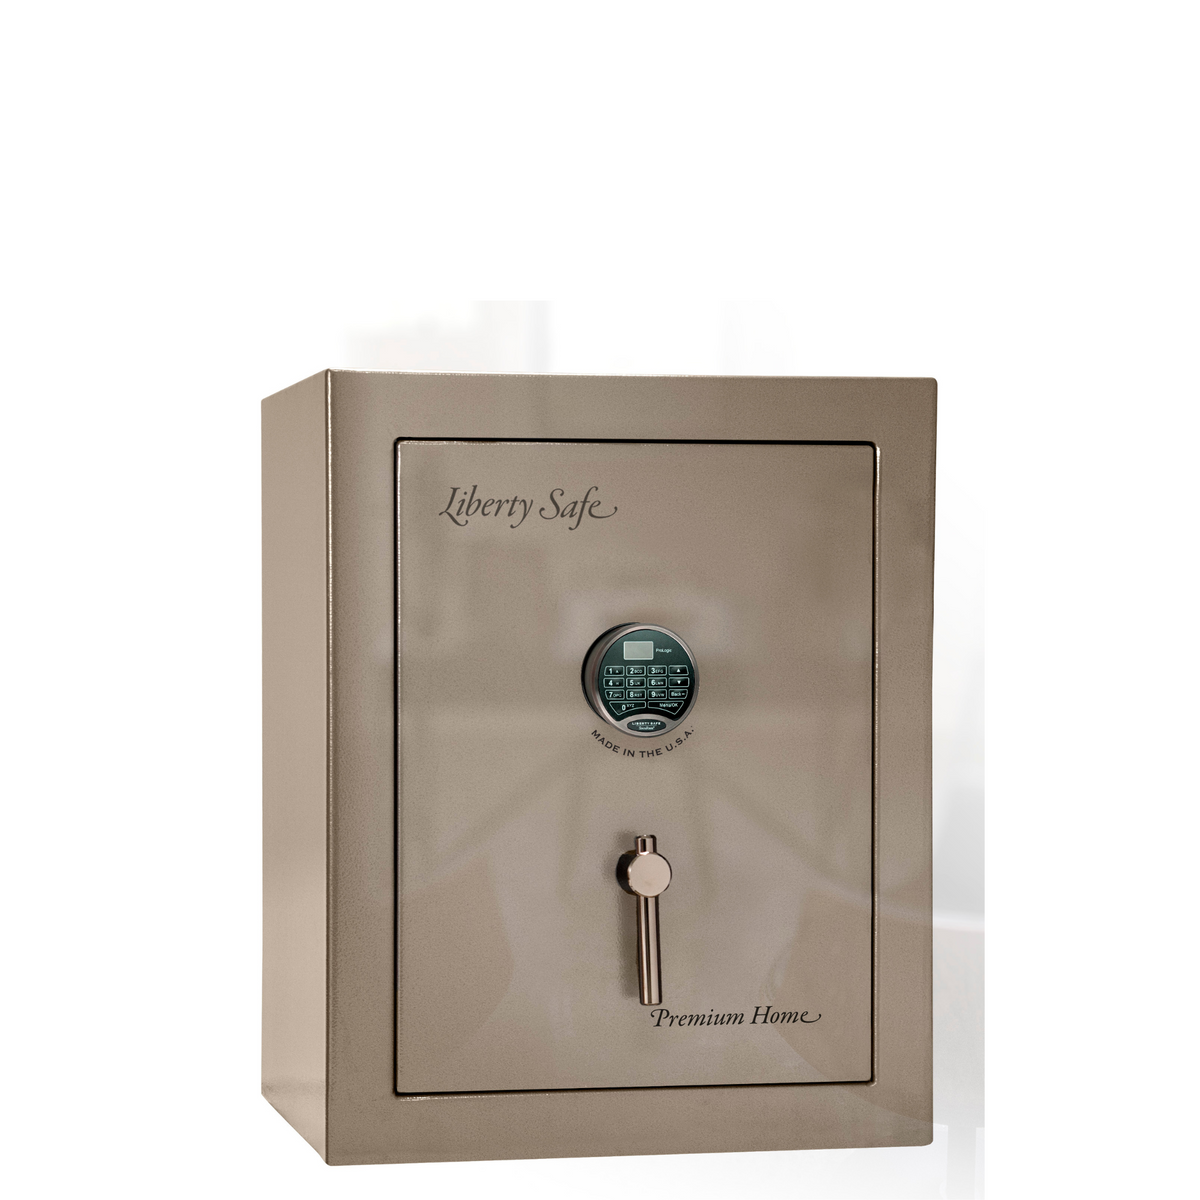 Premium Home Series | Level 7 Security | 2 Hour Fire Protection | 08 | Dimensions: 30&quot;(H) x 24&quot;(W) x 20.25&quot;(D) | Champagne Gloss - Closed Door